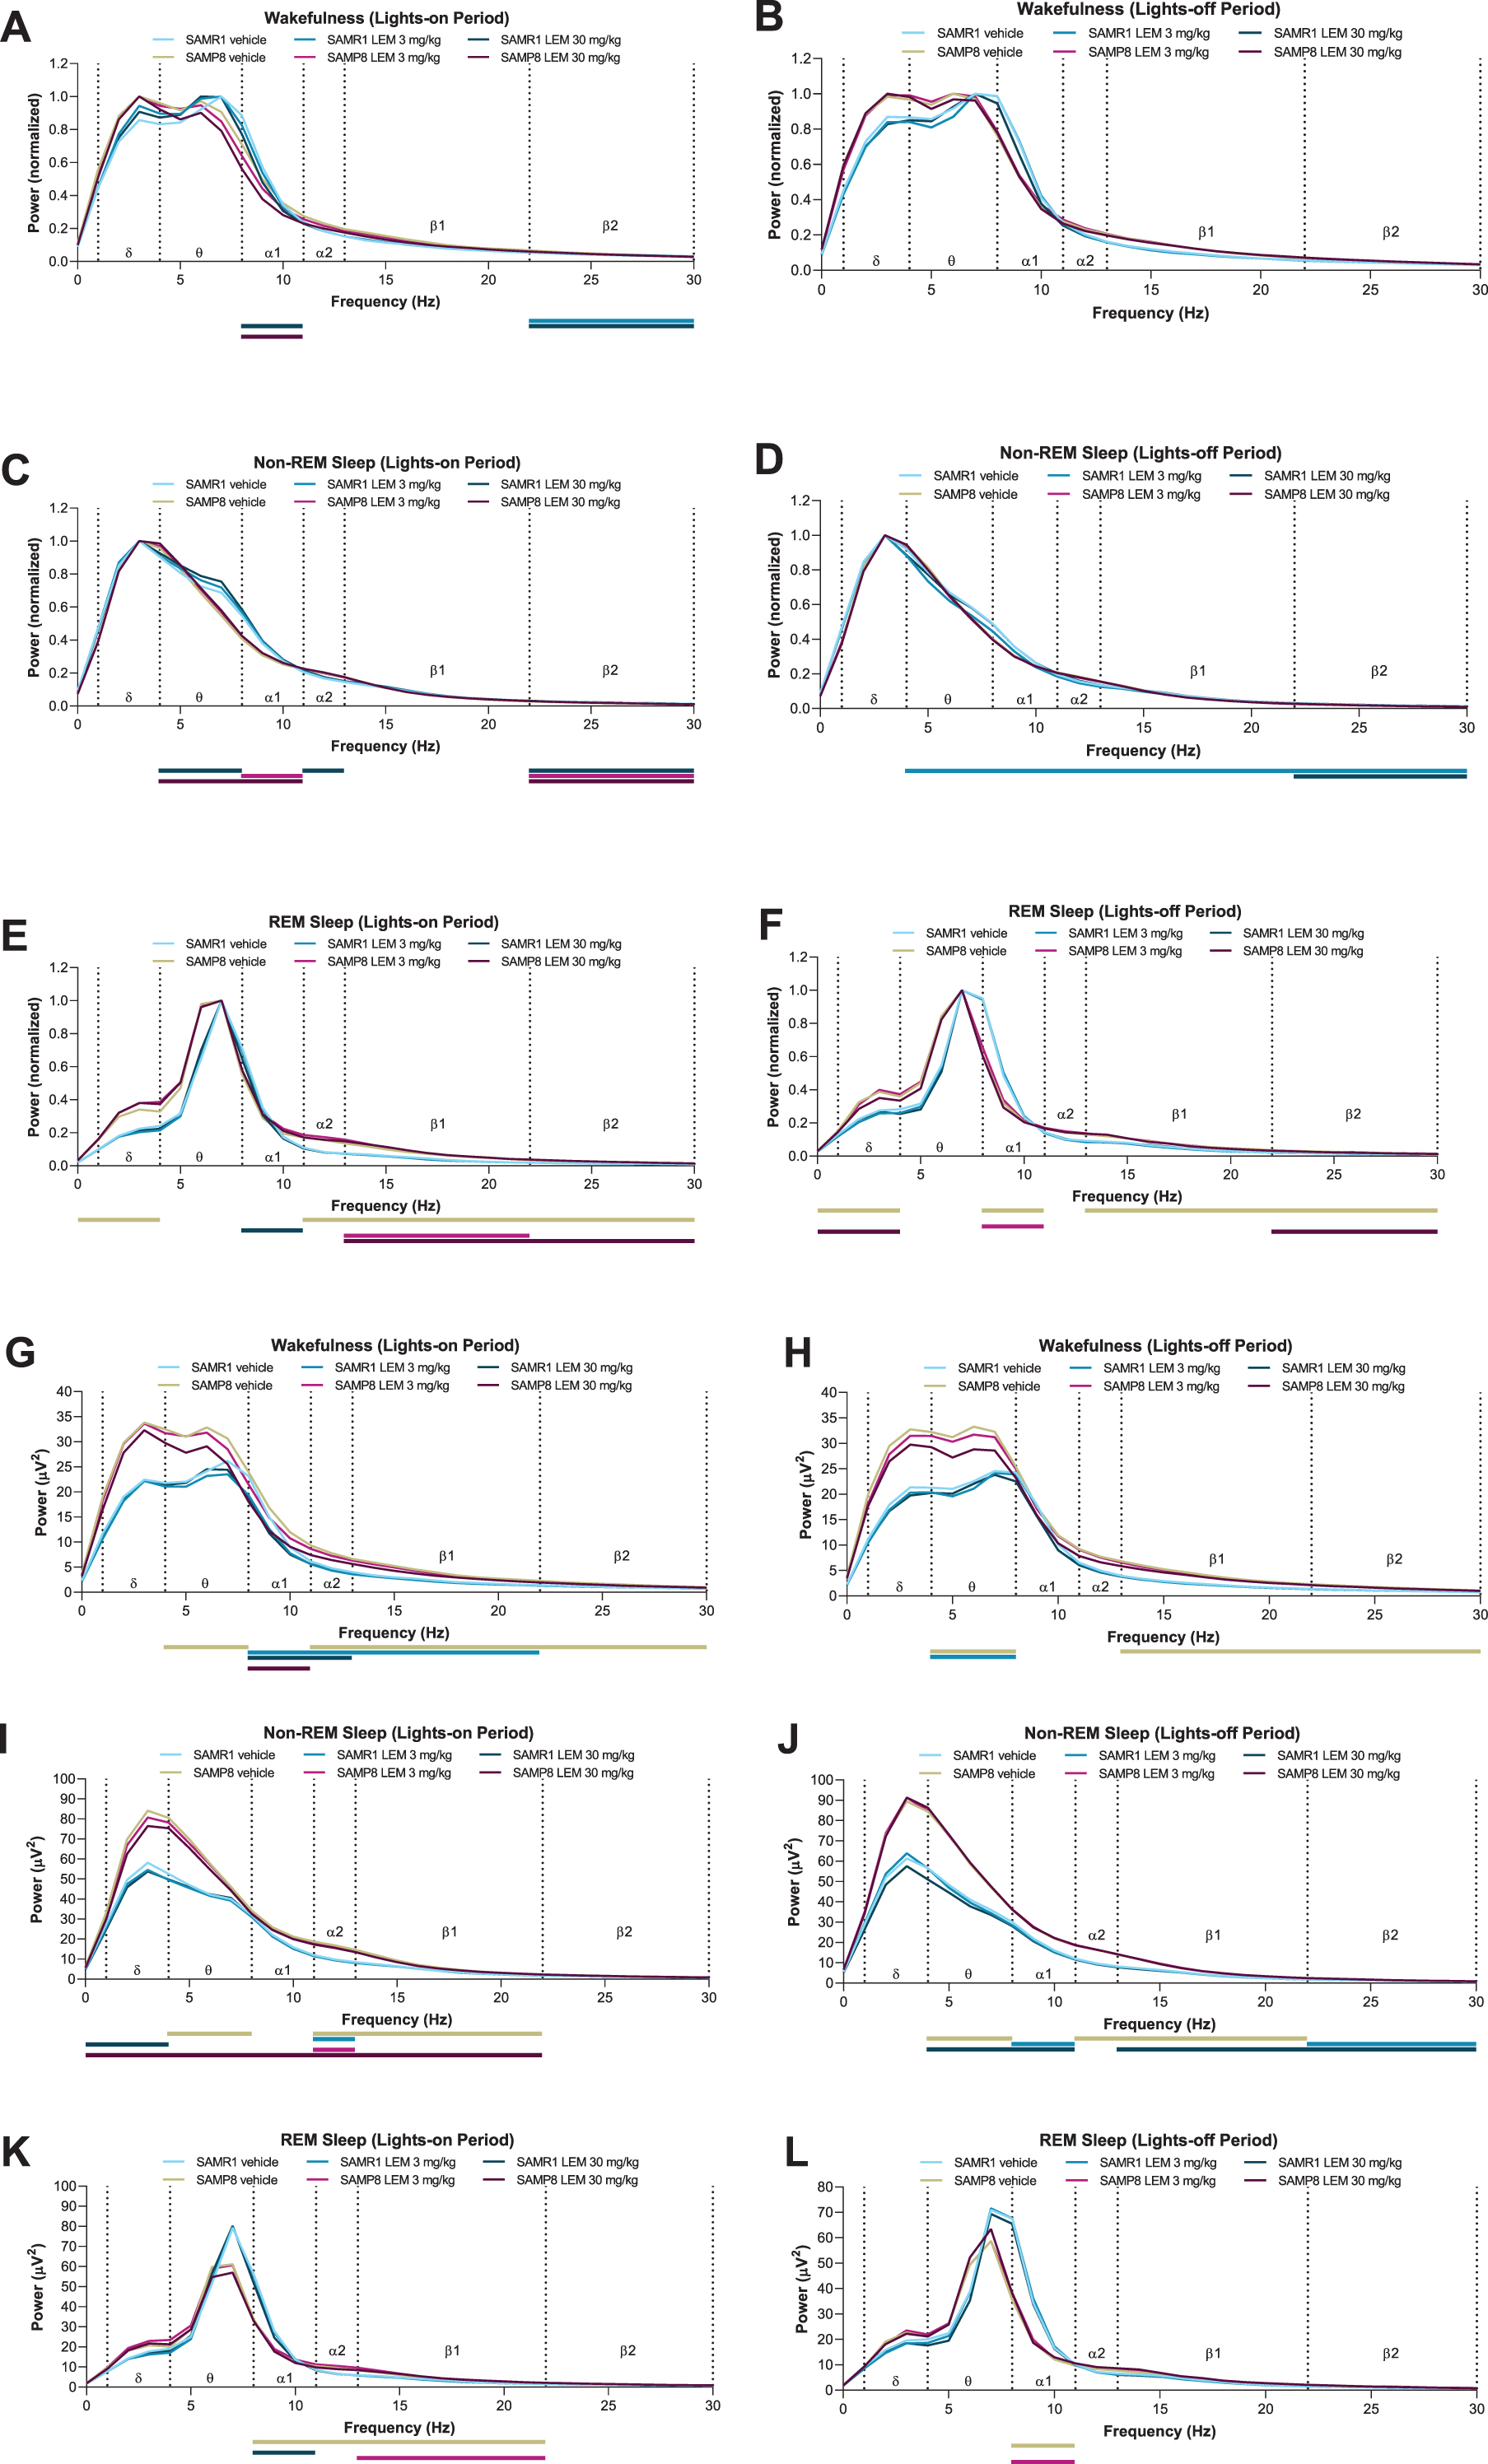 Effect of lemborexant (LEM) on A–F) normalized and G–L) absolute electroencephalogram (EEG) power spectra in senescence-accelerated mouse prone-8 (SAMP8) and senescence-accelerated mouse resistant-1 (SAMR1) mice. In a randomized crossover design, mice (SAMR1, n = 7 per treatment; SAMP8, n = 8 per treatment) received single oral doses of vehicle, LEM 3 mg/kg, and LEM 30 mg/kg at Zeitgeber time 0:00–0:30. EEG spectra bands (designated by dotted vertical lines) are as follows: δ= 1–4 Hz; θ= 4–8 Hz; α1 = 8–11 Hz; α2 = 11–13 Hz; β1 = 13–22 Hz; β2 = 22–30 Hz. Data are mean values. REM, rapid eye movement. Gold bar indicates p < 0.05 versus SAMR1 vehicle for EEG bands. Other bars indicate p < 0.05 versus vehicle within strain. Statistical analyses were performed using linear mixed-model analysis (with treatment/strain as fixed effects and animal and spectra band as a random effect), followed by Fisher’s least significance difference test (SAMR1-vehicle versus SAMP8-vehicle) or Dunnett type multiple comparison test (versus vehicle).